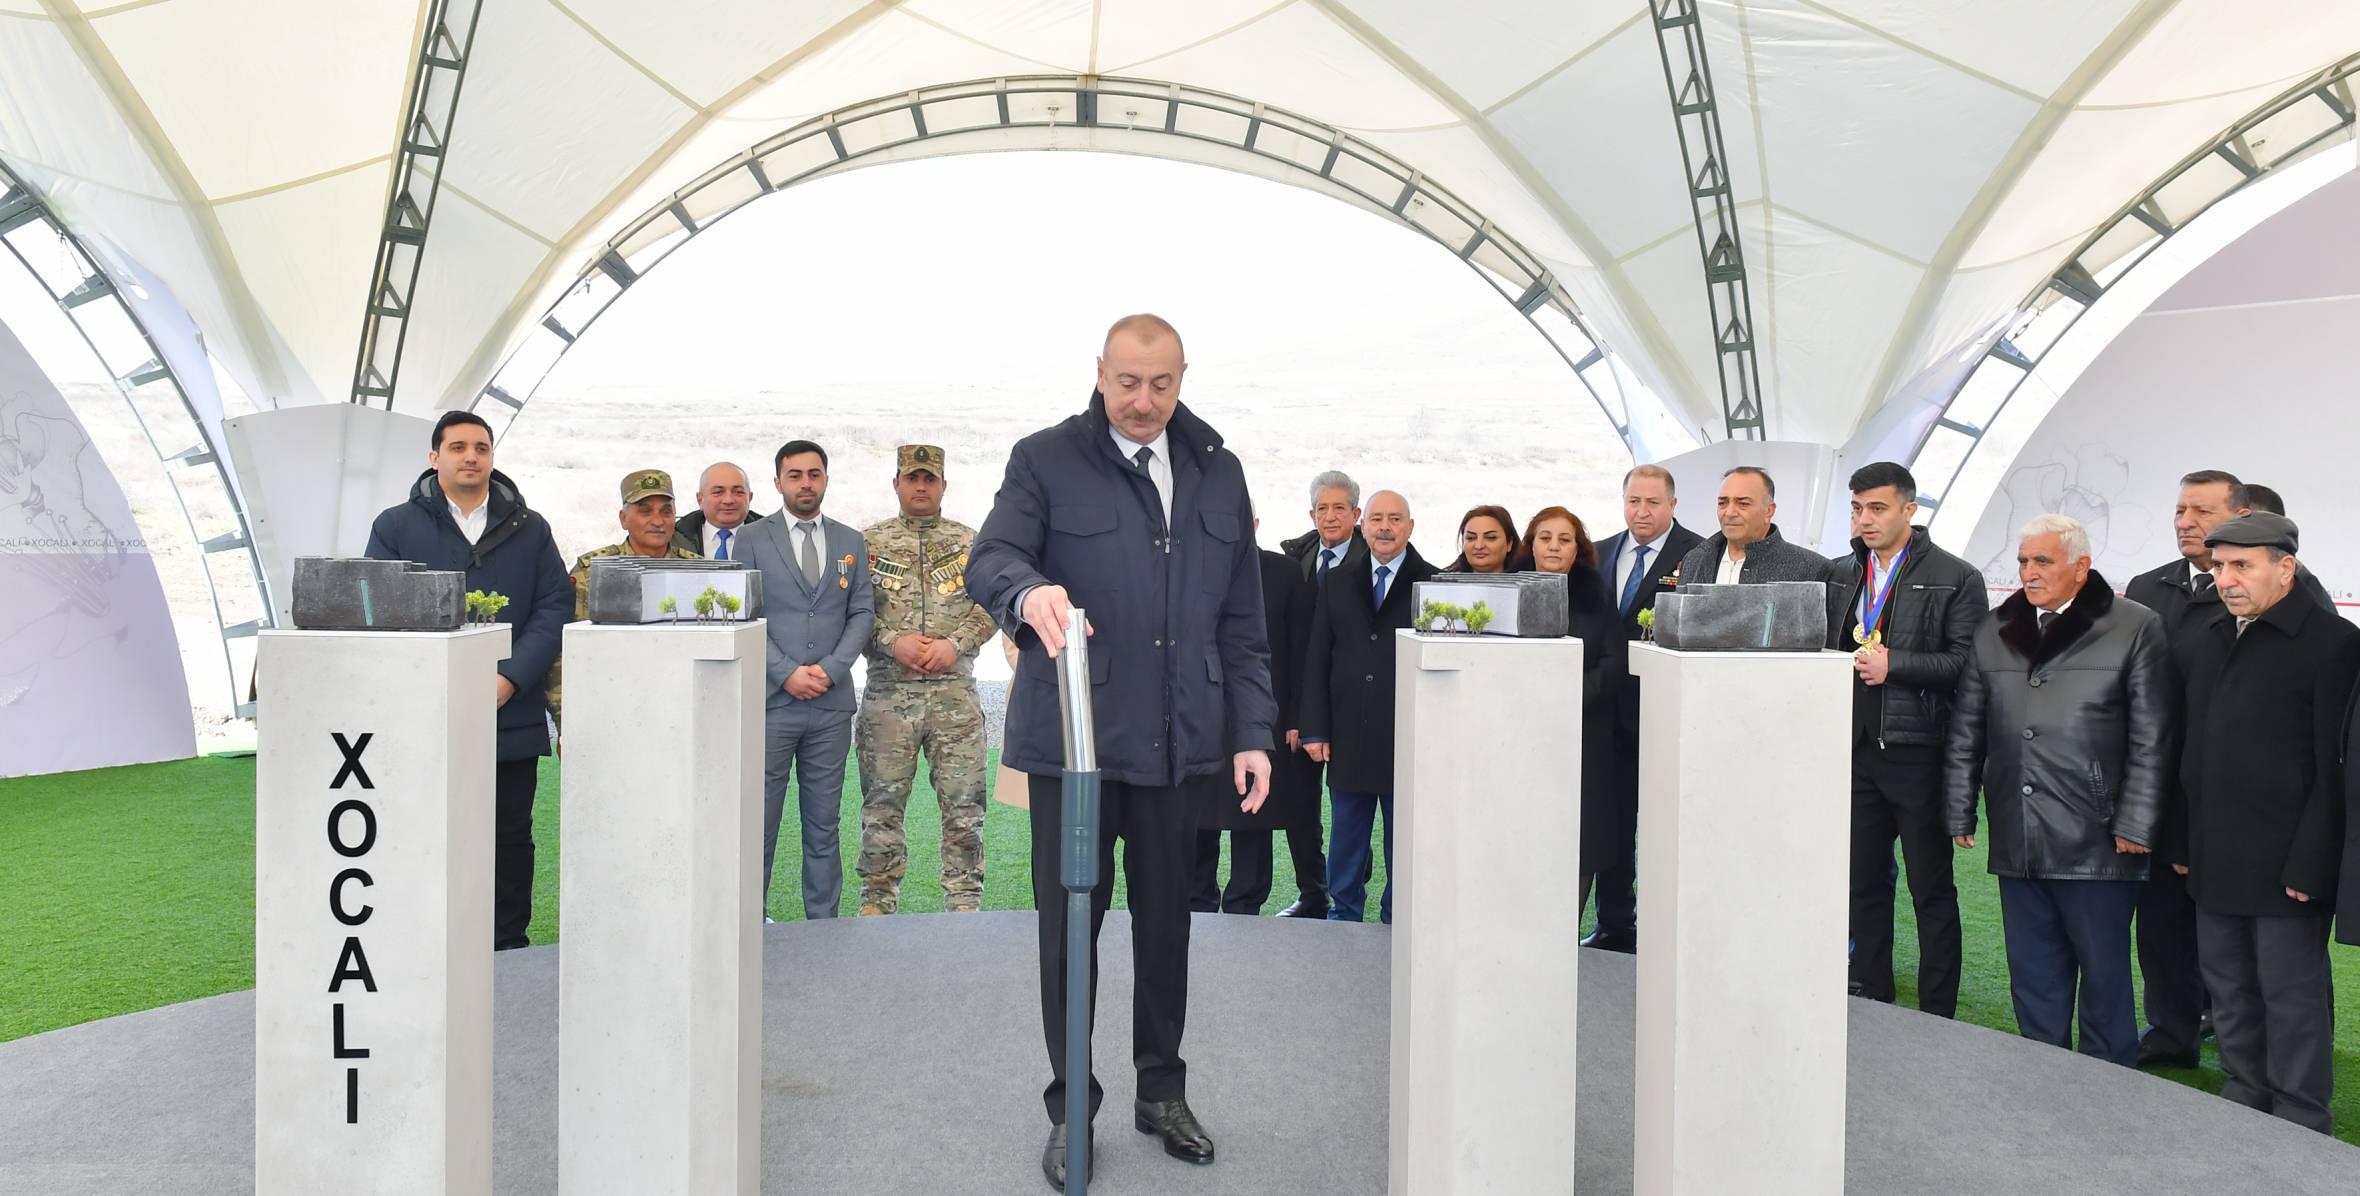 Ilham Aliyev laid foundation stone for Khojaly genocide memorial and met with representatives of general public